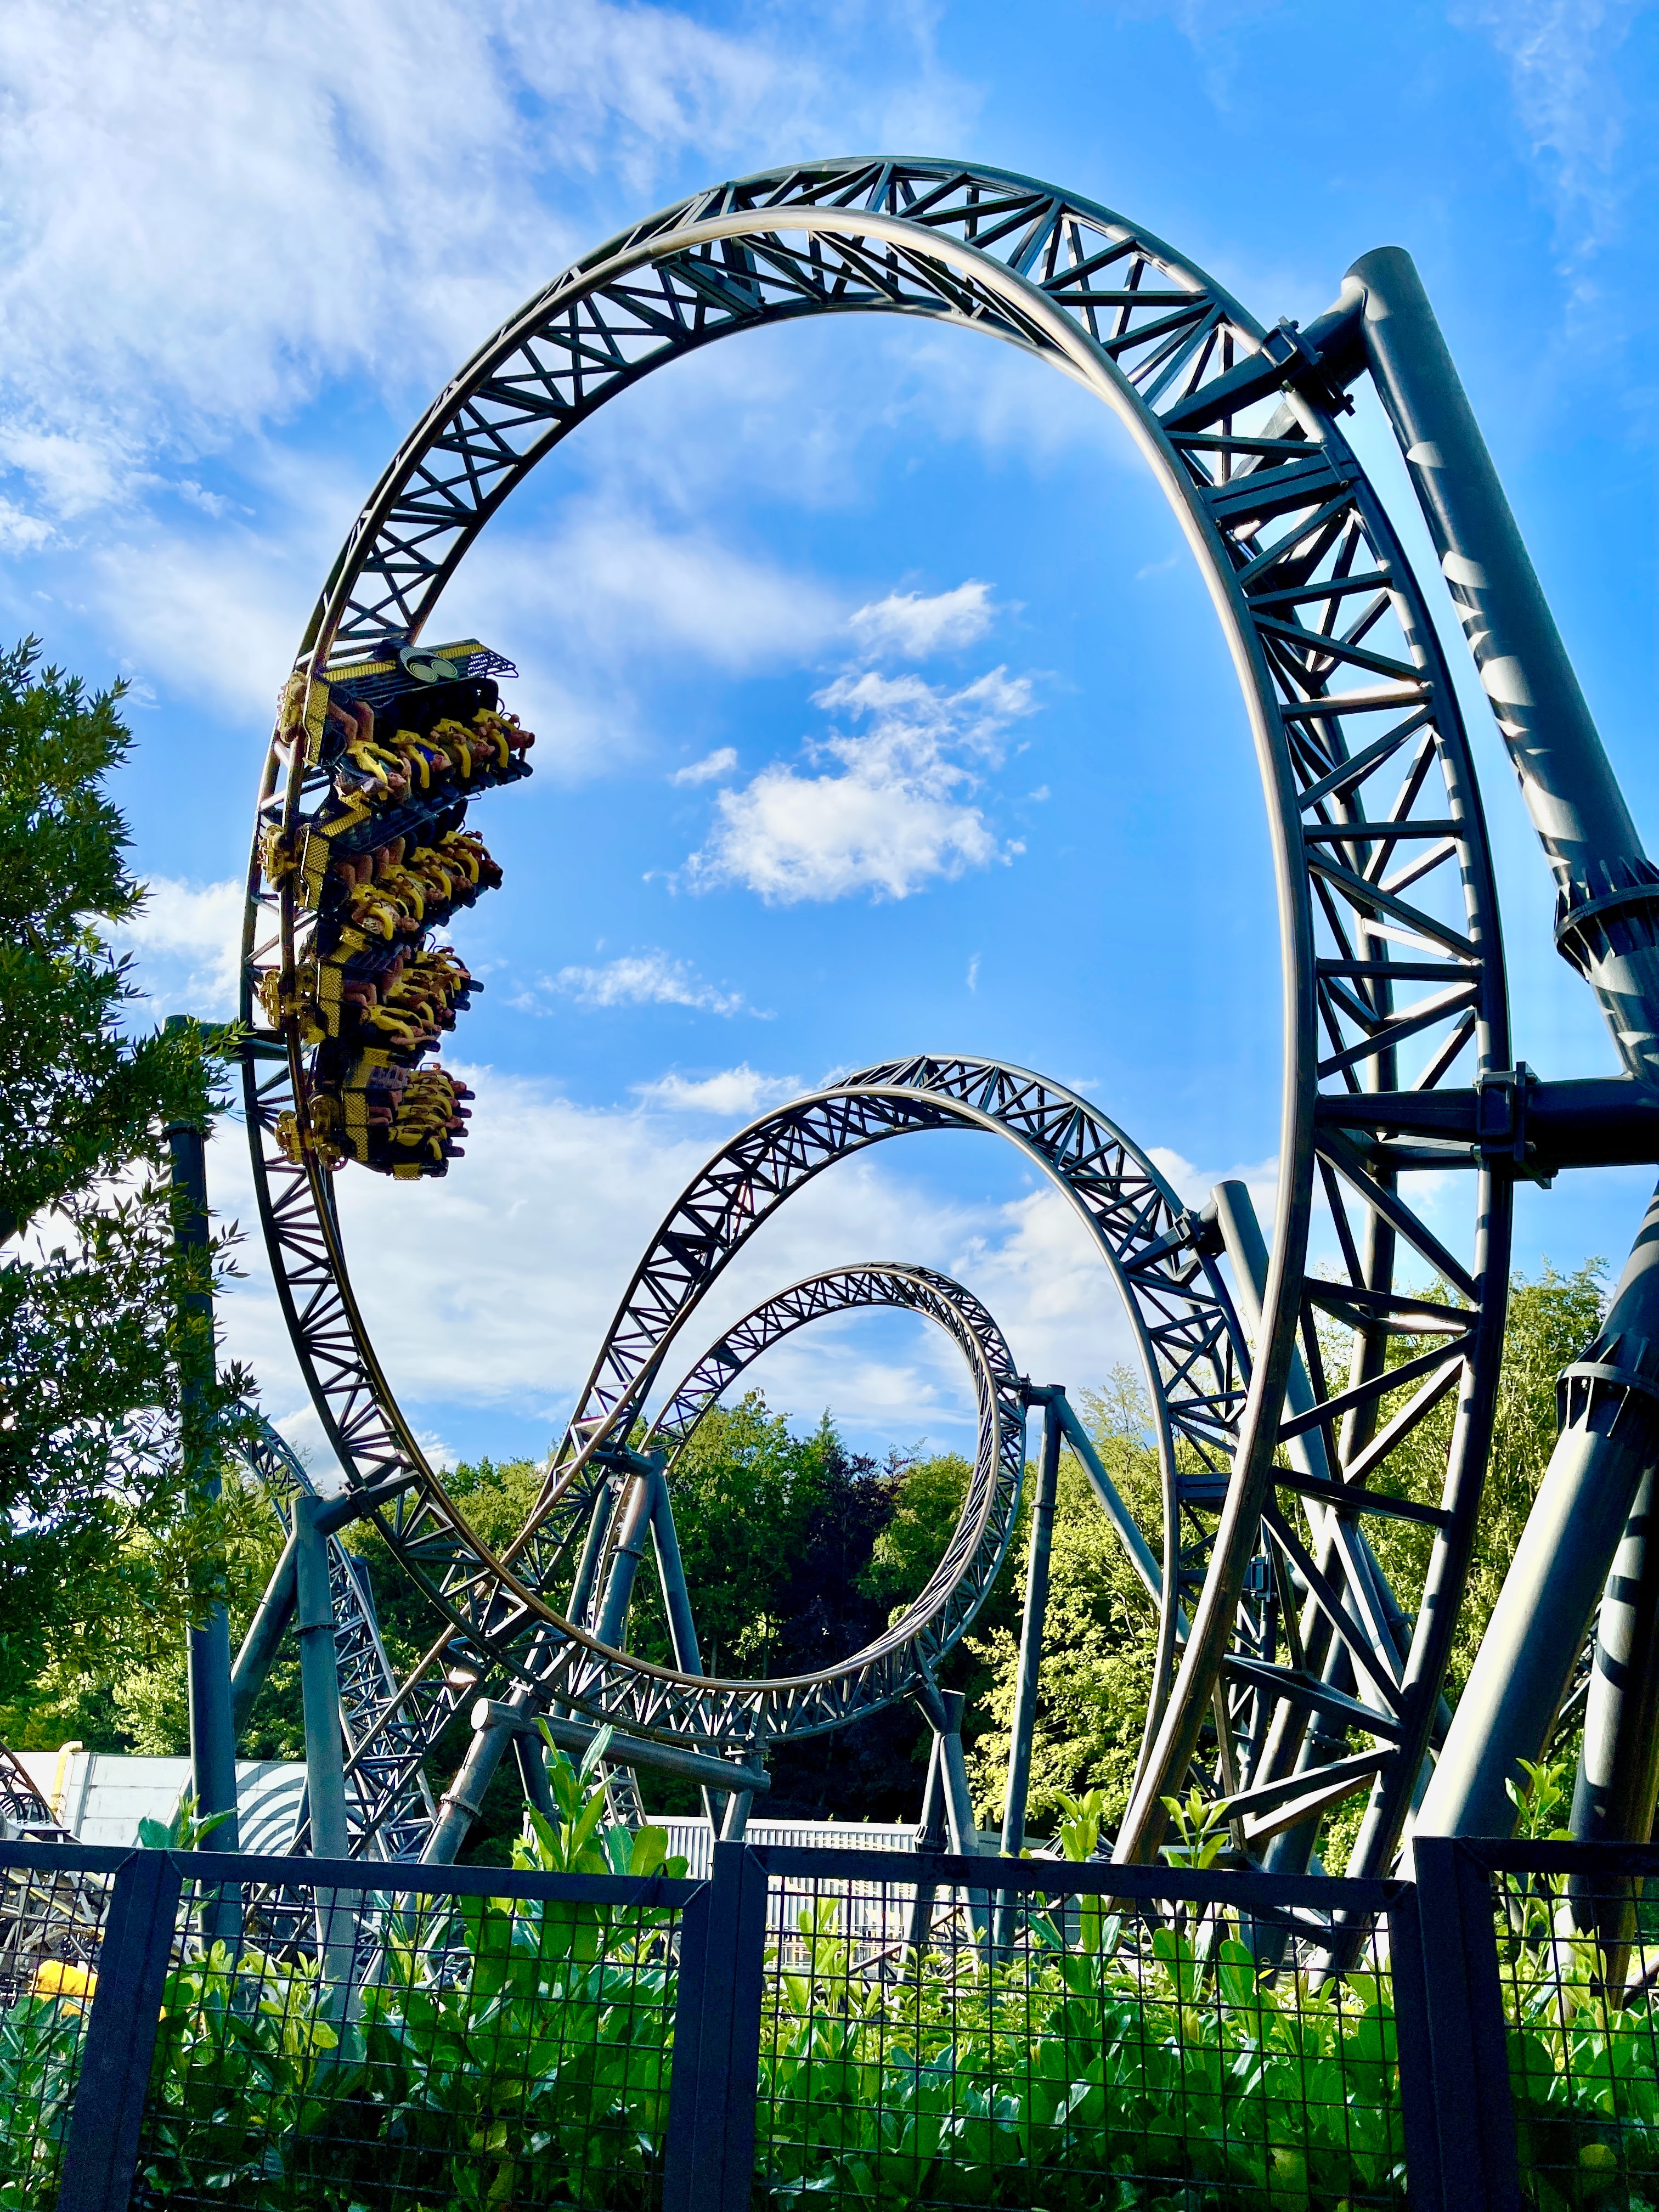 Twisting and turning rollercoaster with in the distance people in a yellow car upside down also a beautiful blue sky with fluffy white clouds behind it and you can also see trees and green bushes 